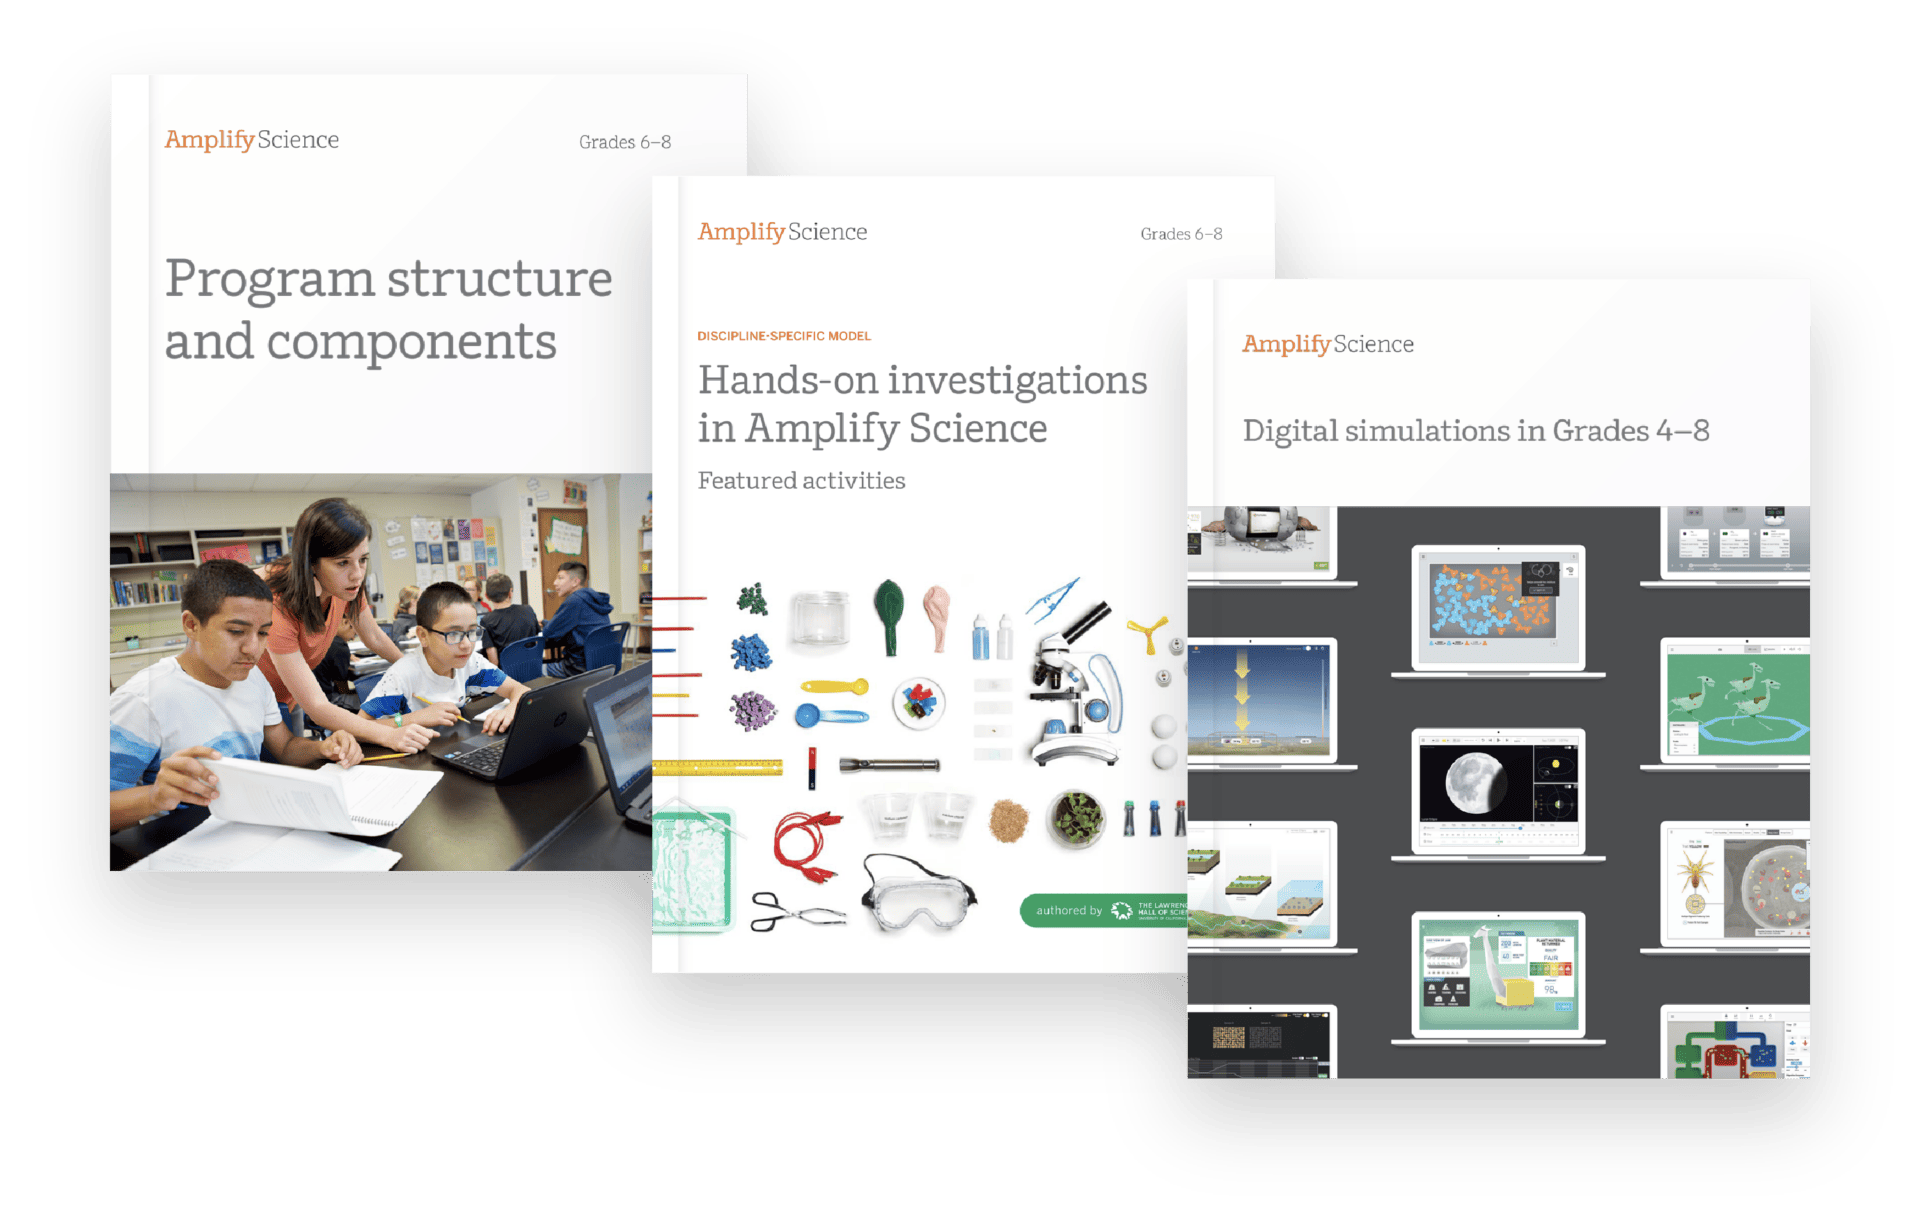 Collage of educational materials from amplify science, including images of students in a classroom, hands-on science tools, and digital simulations for grades 4-8.